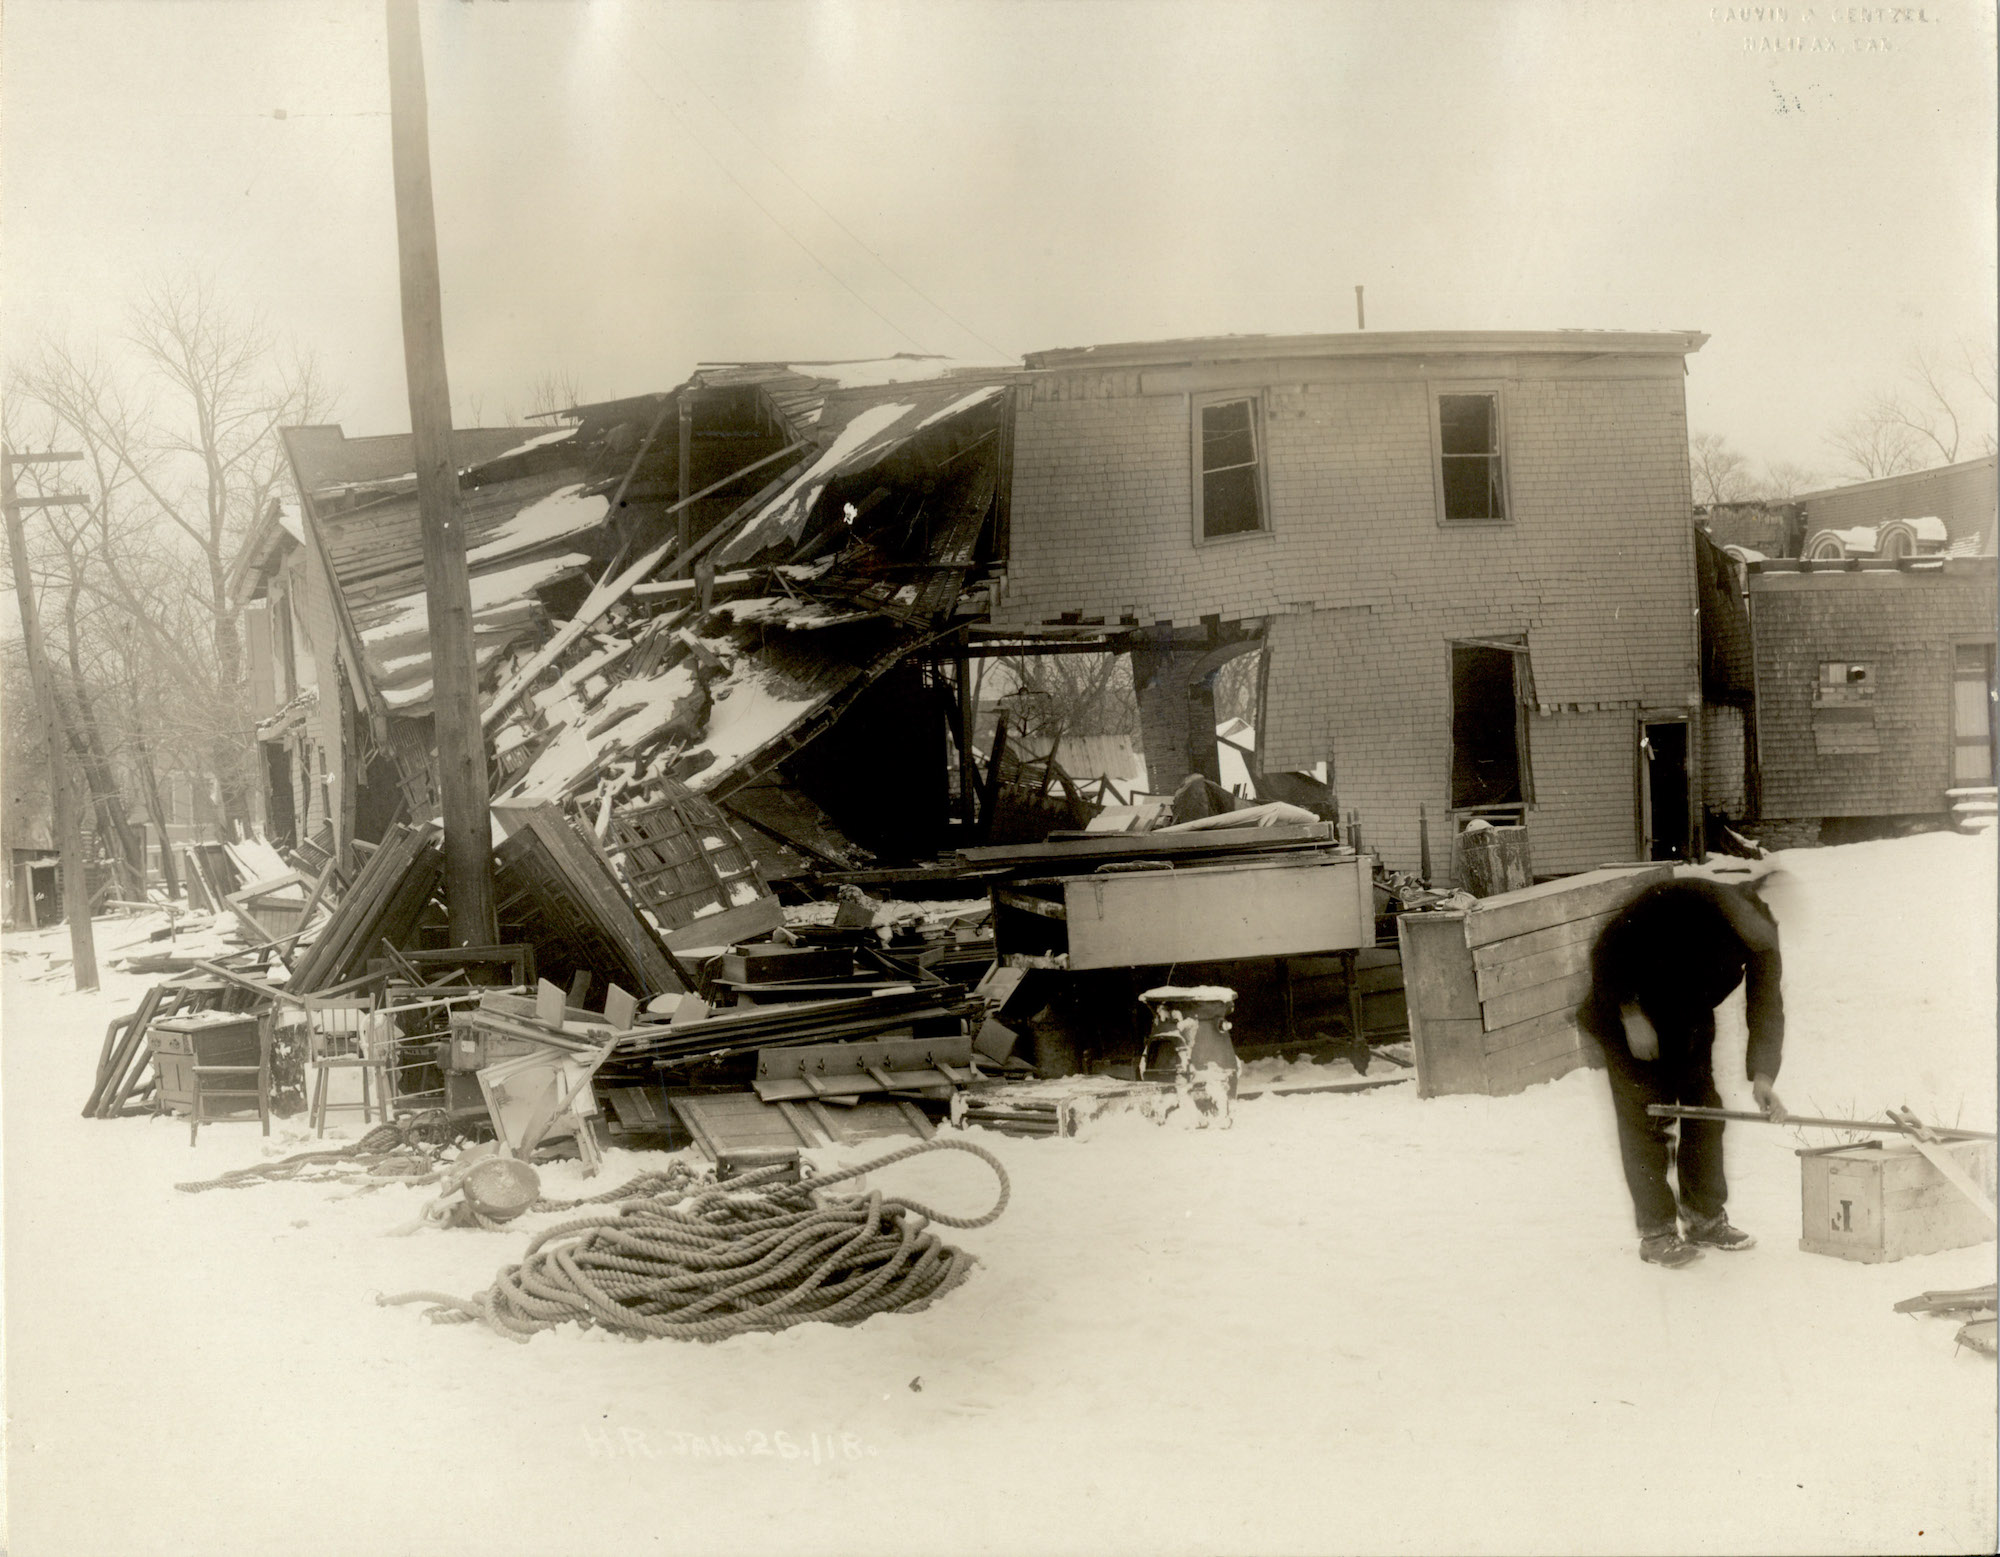 Halifax, N.S.: Damage caused by the explosion.